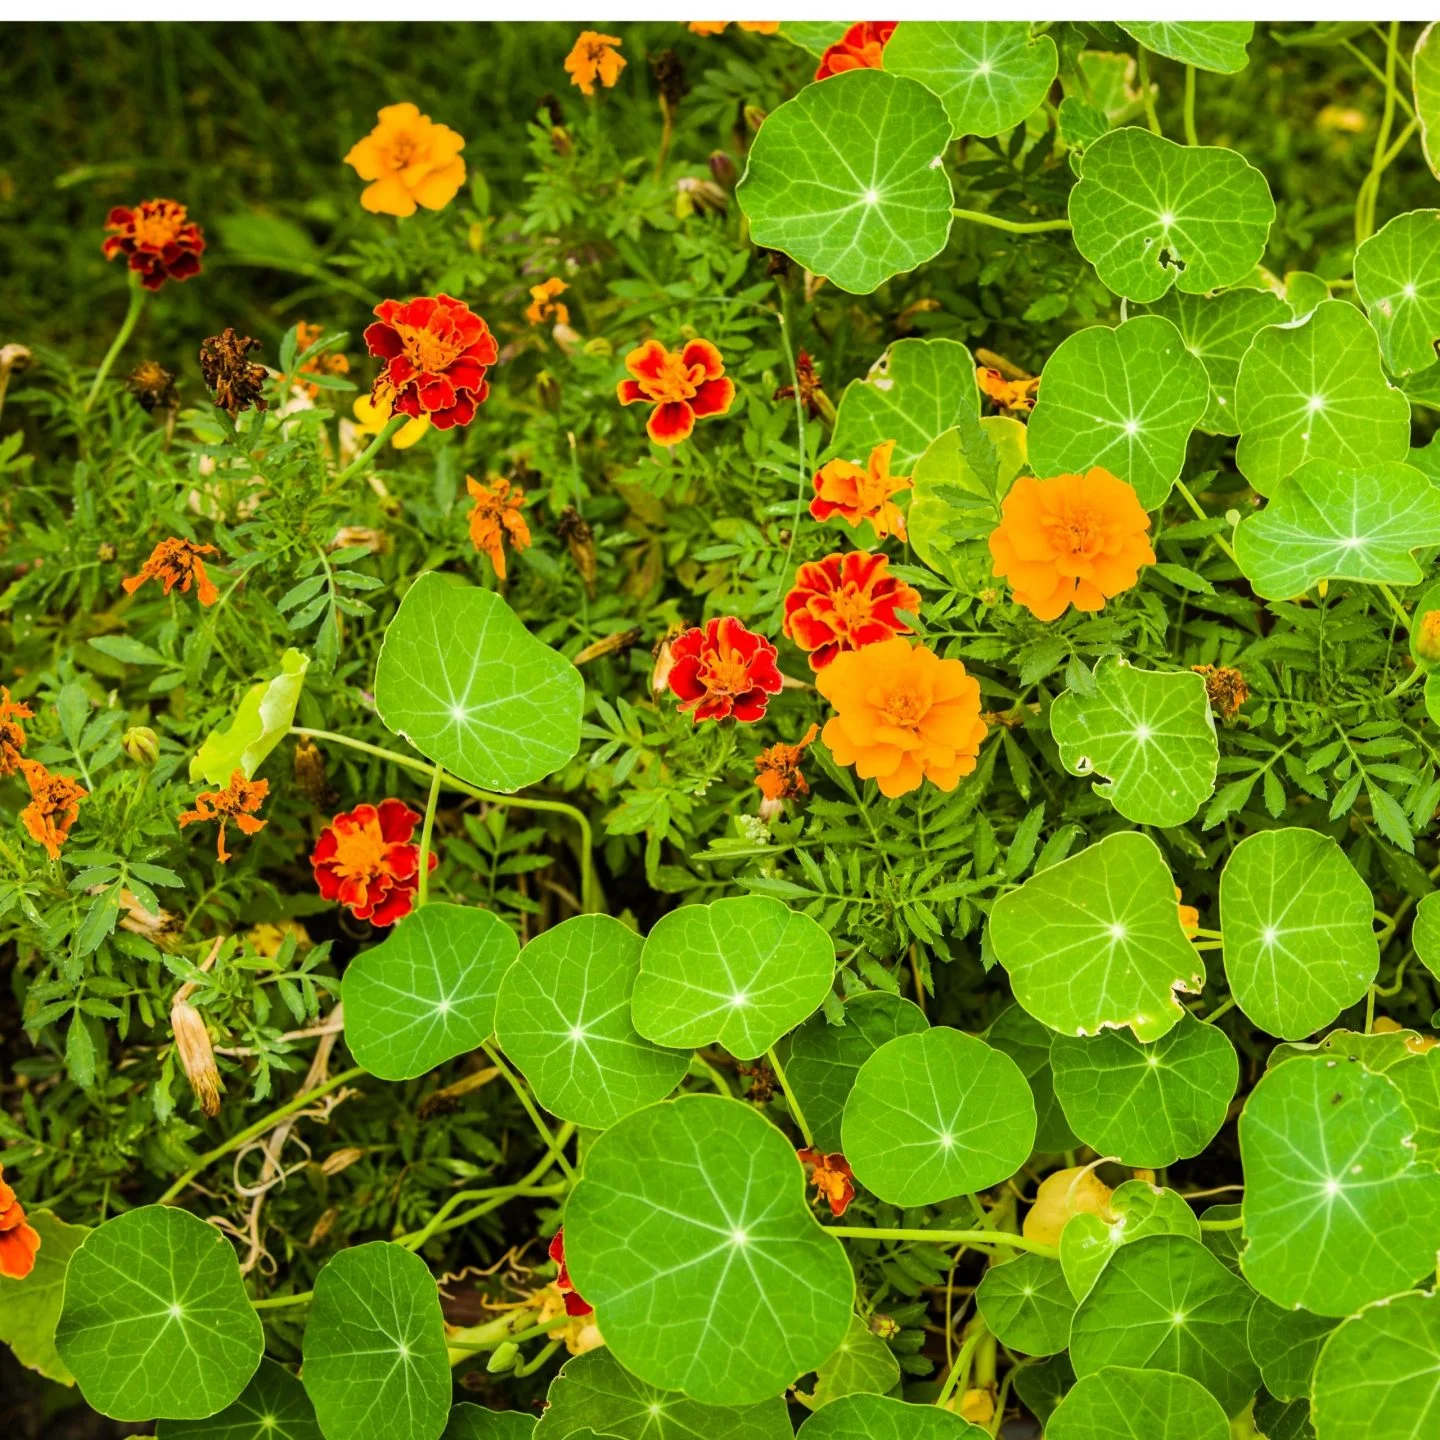 Marigolds and nasturtiums pair perfeclty with cucumbers plants.